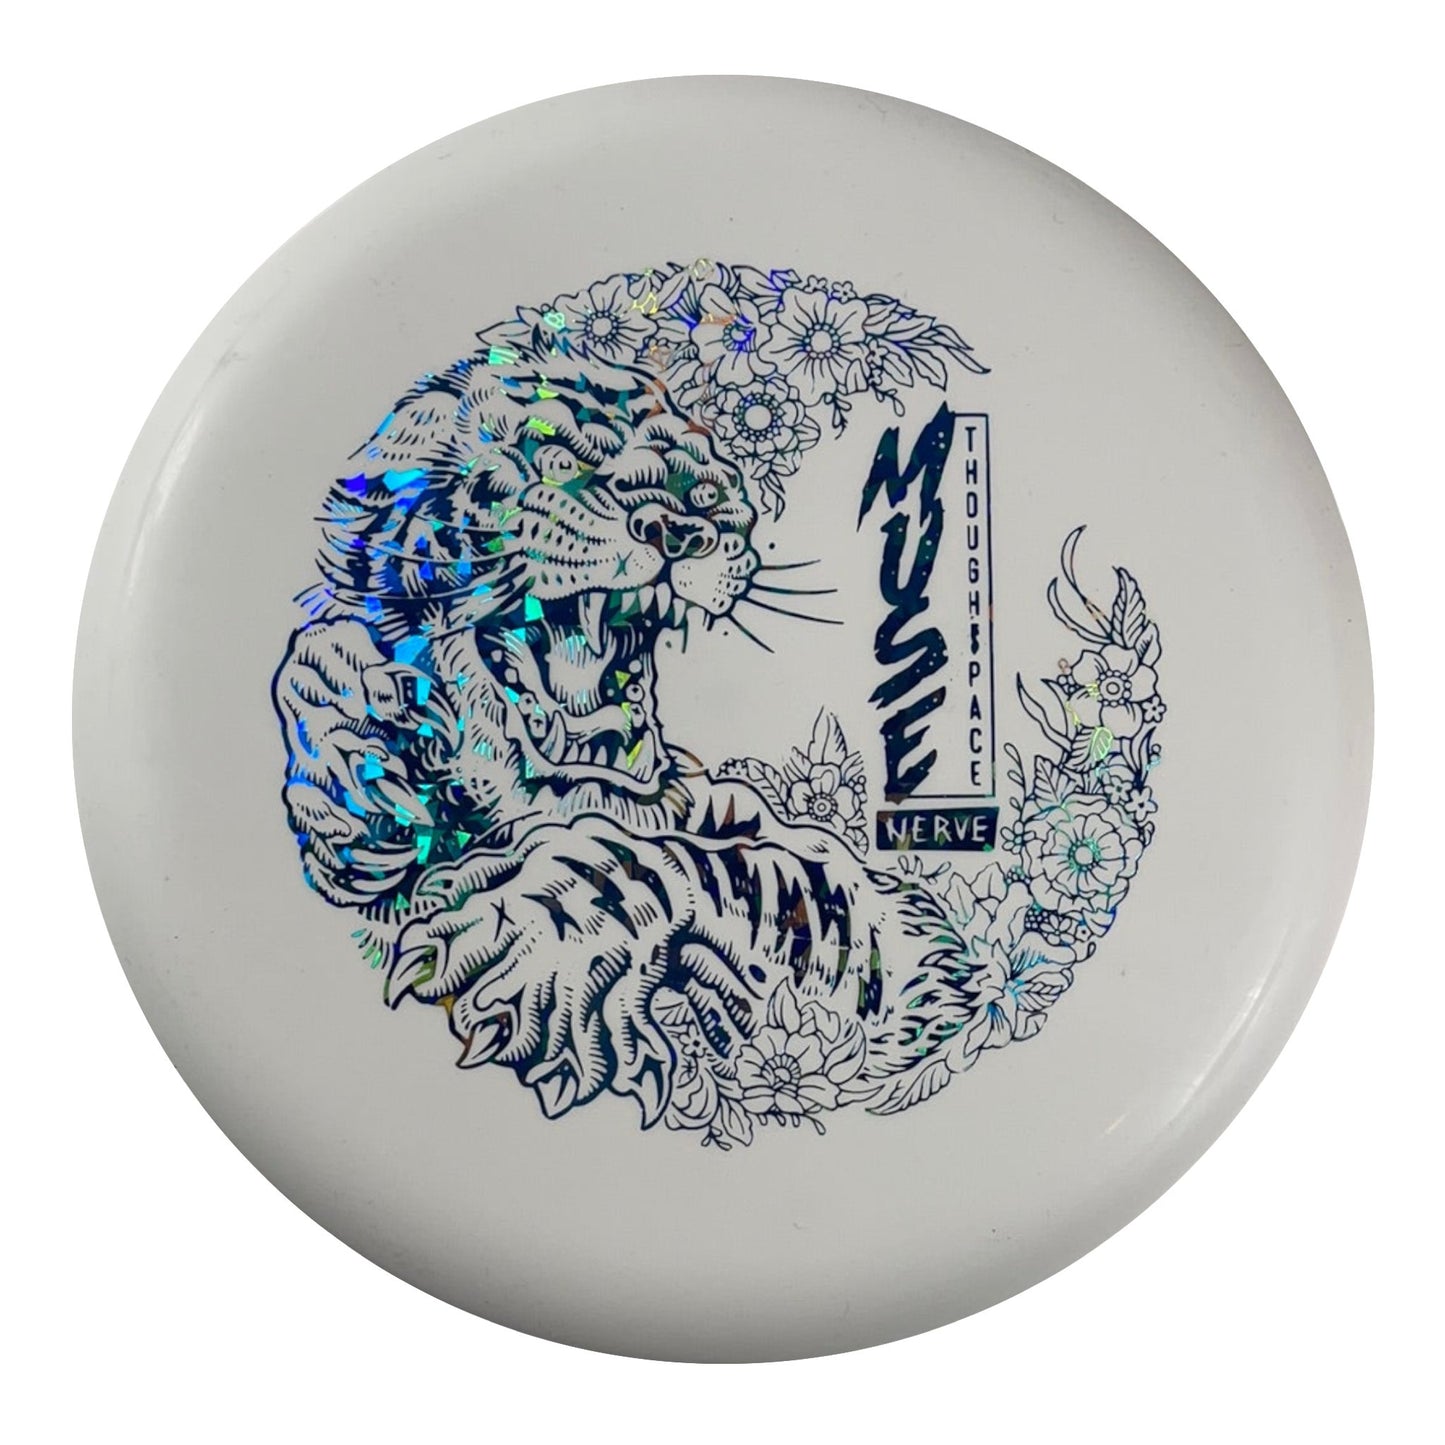 Thought Space Athletics Muse | Nerve | White/Blue Holo 172g Disc Golf